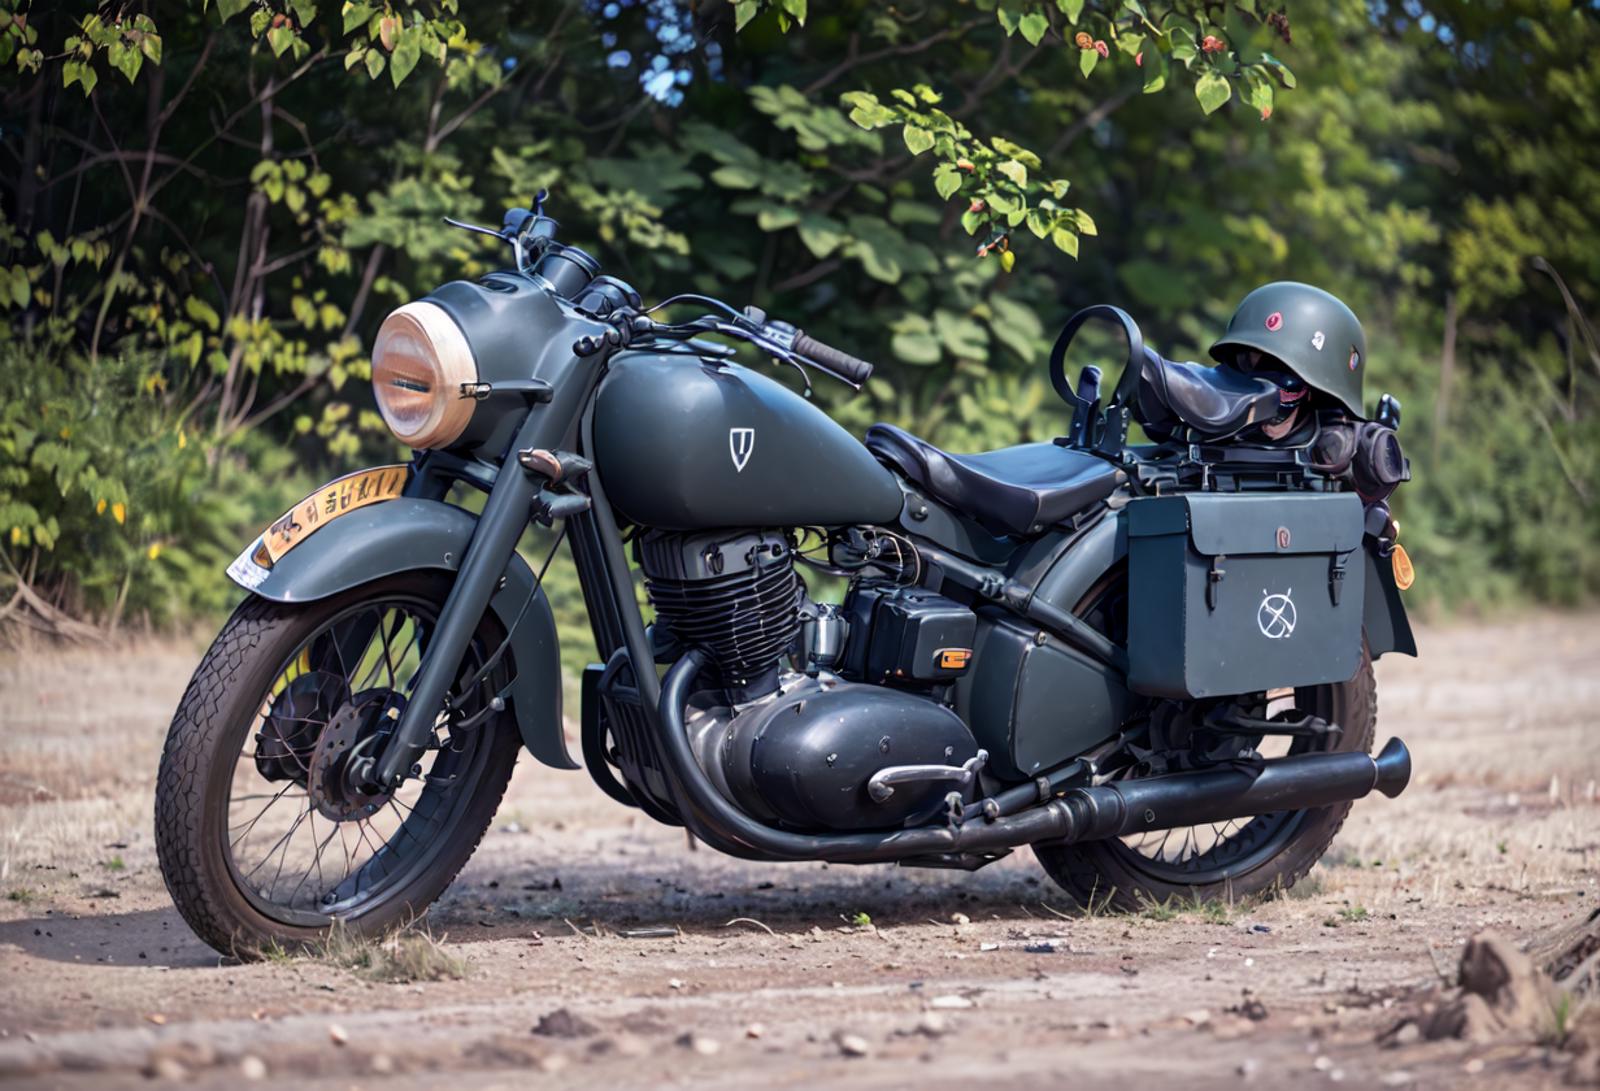 DKW NZ350 image by ehowton